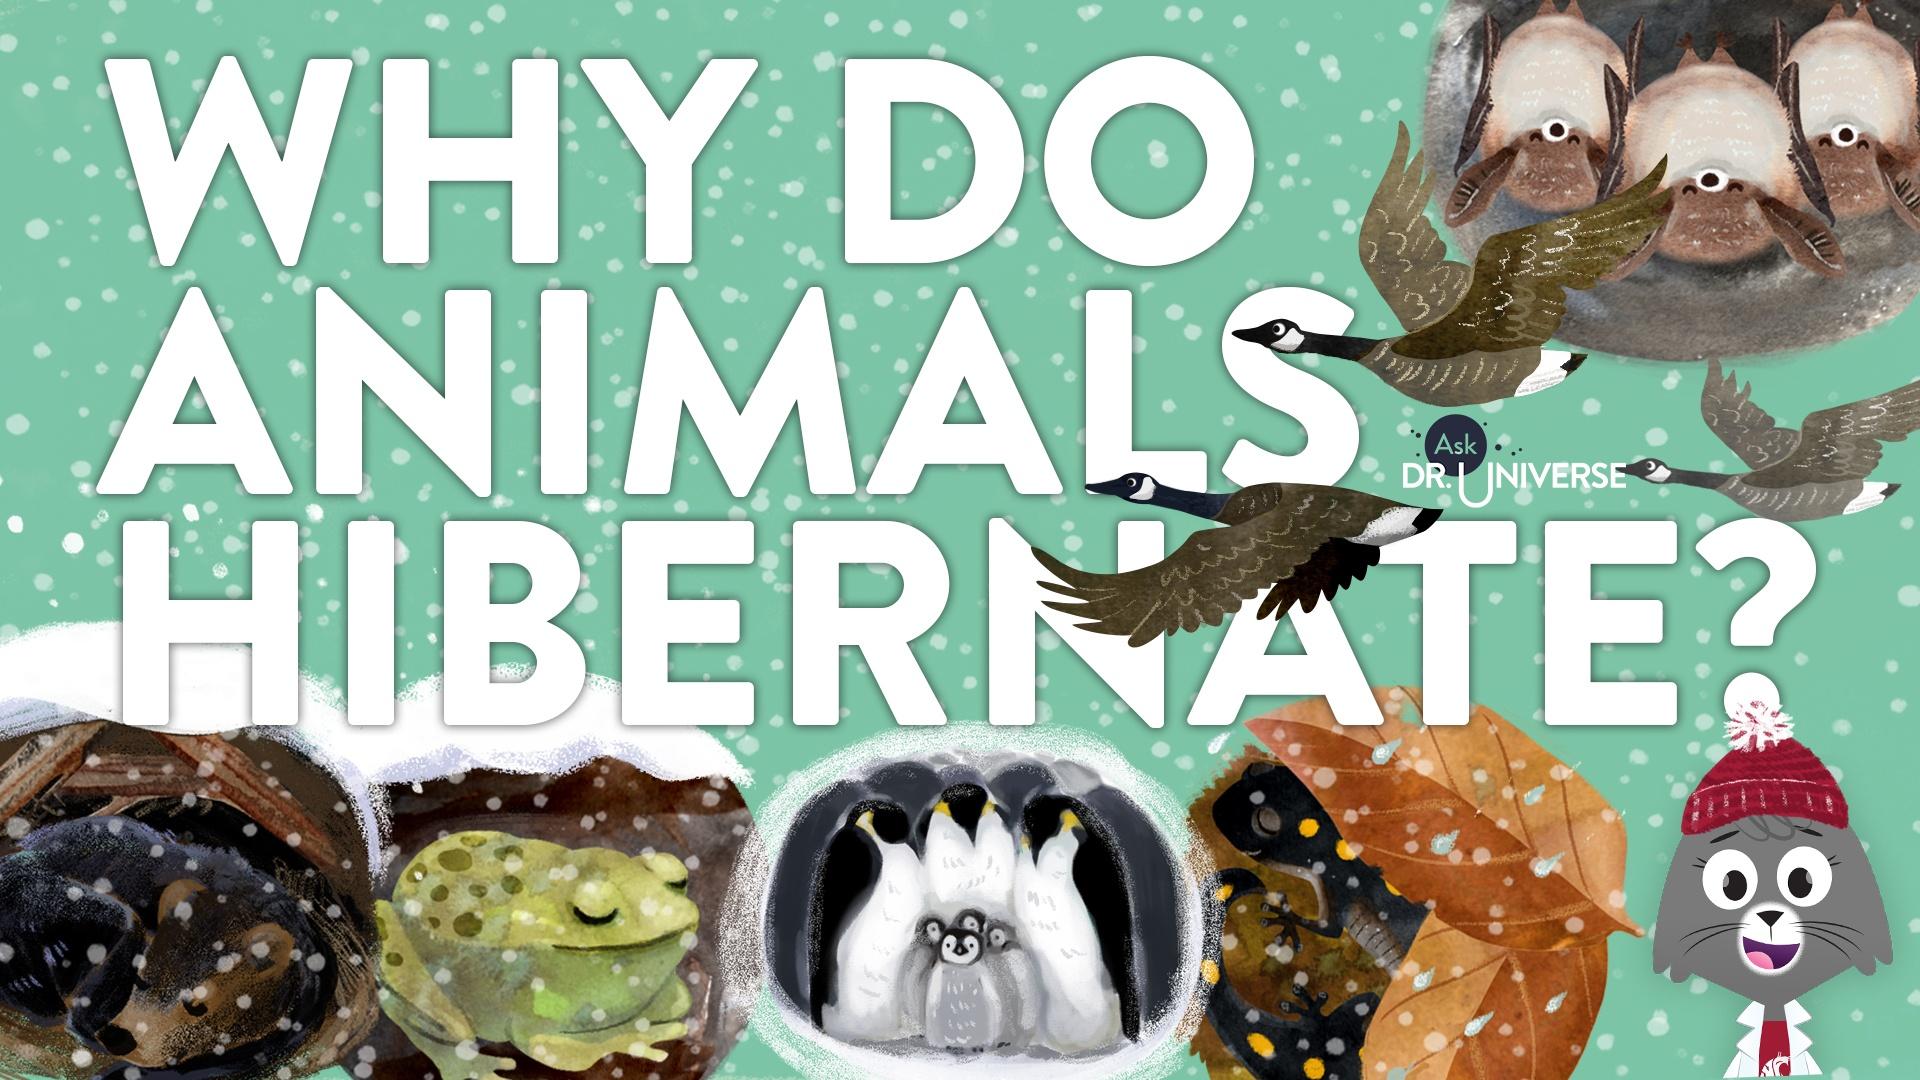 Ask Dr. Universe | Why Do Animals Hibernate? | Episode 7 | PBS